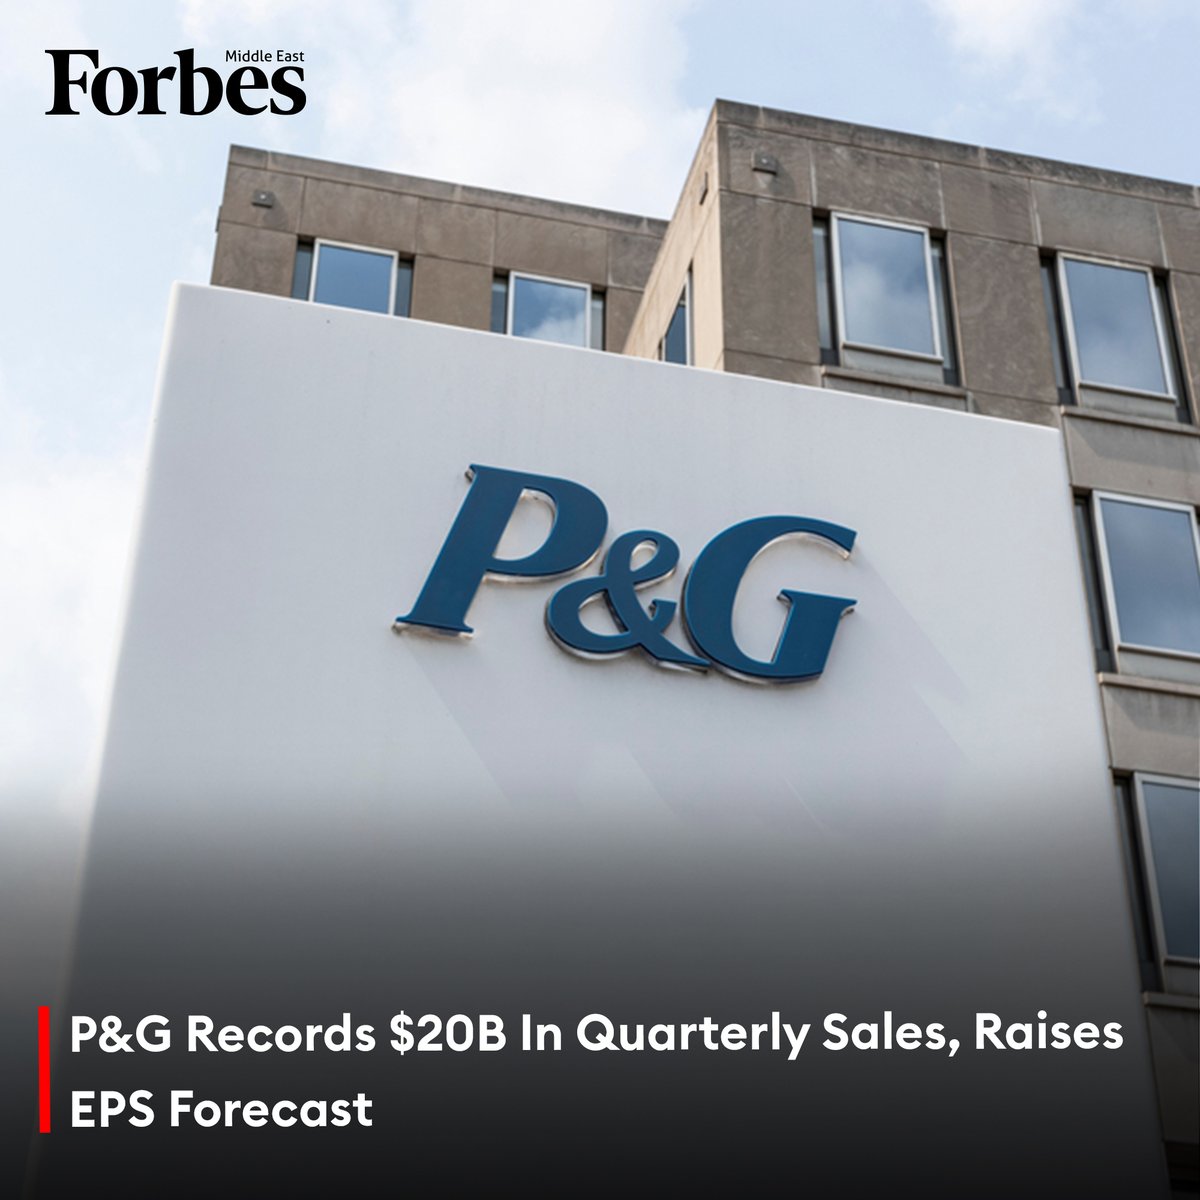 Procter & Gamble reported a 1% increase in its third-quarter sales to $20.2 billion, benefiting from lower commodity costs and increased product prices. #Forbes For more details: 🔗 on.forbesmiddleeast.com/d11442